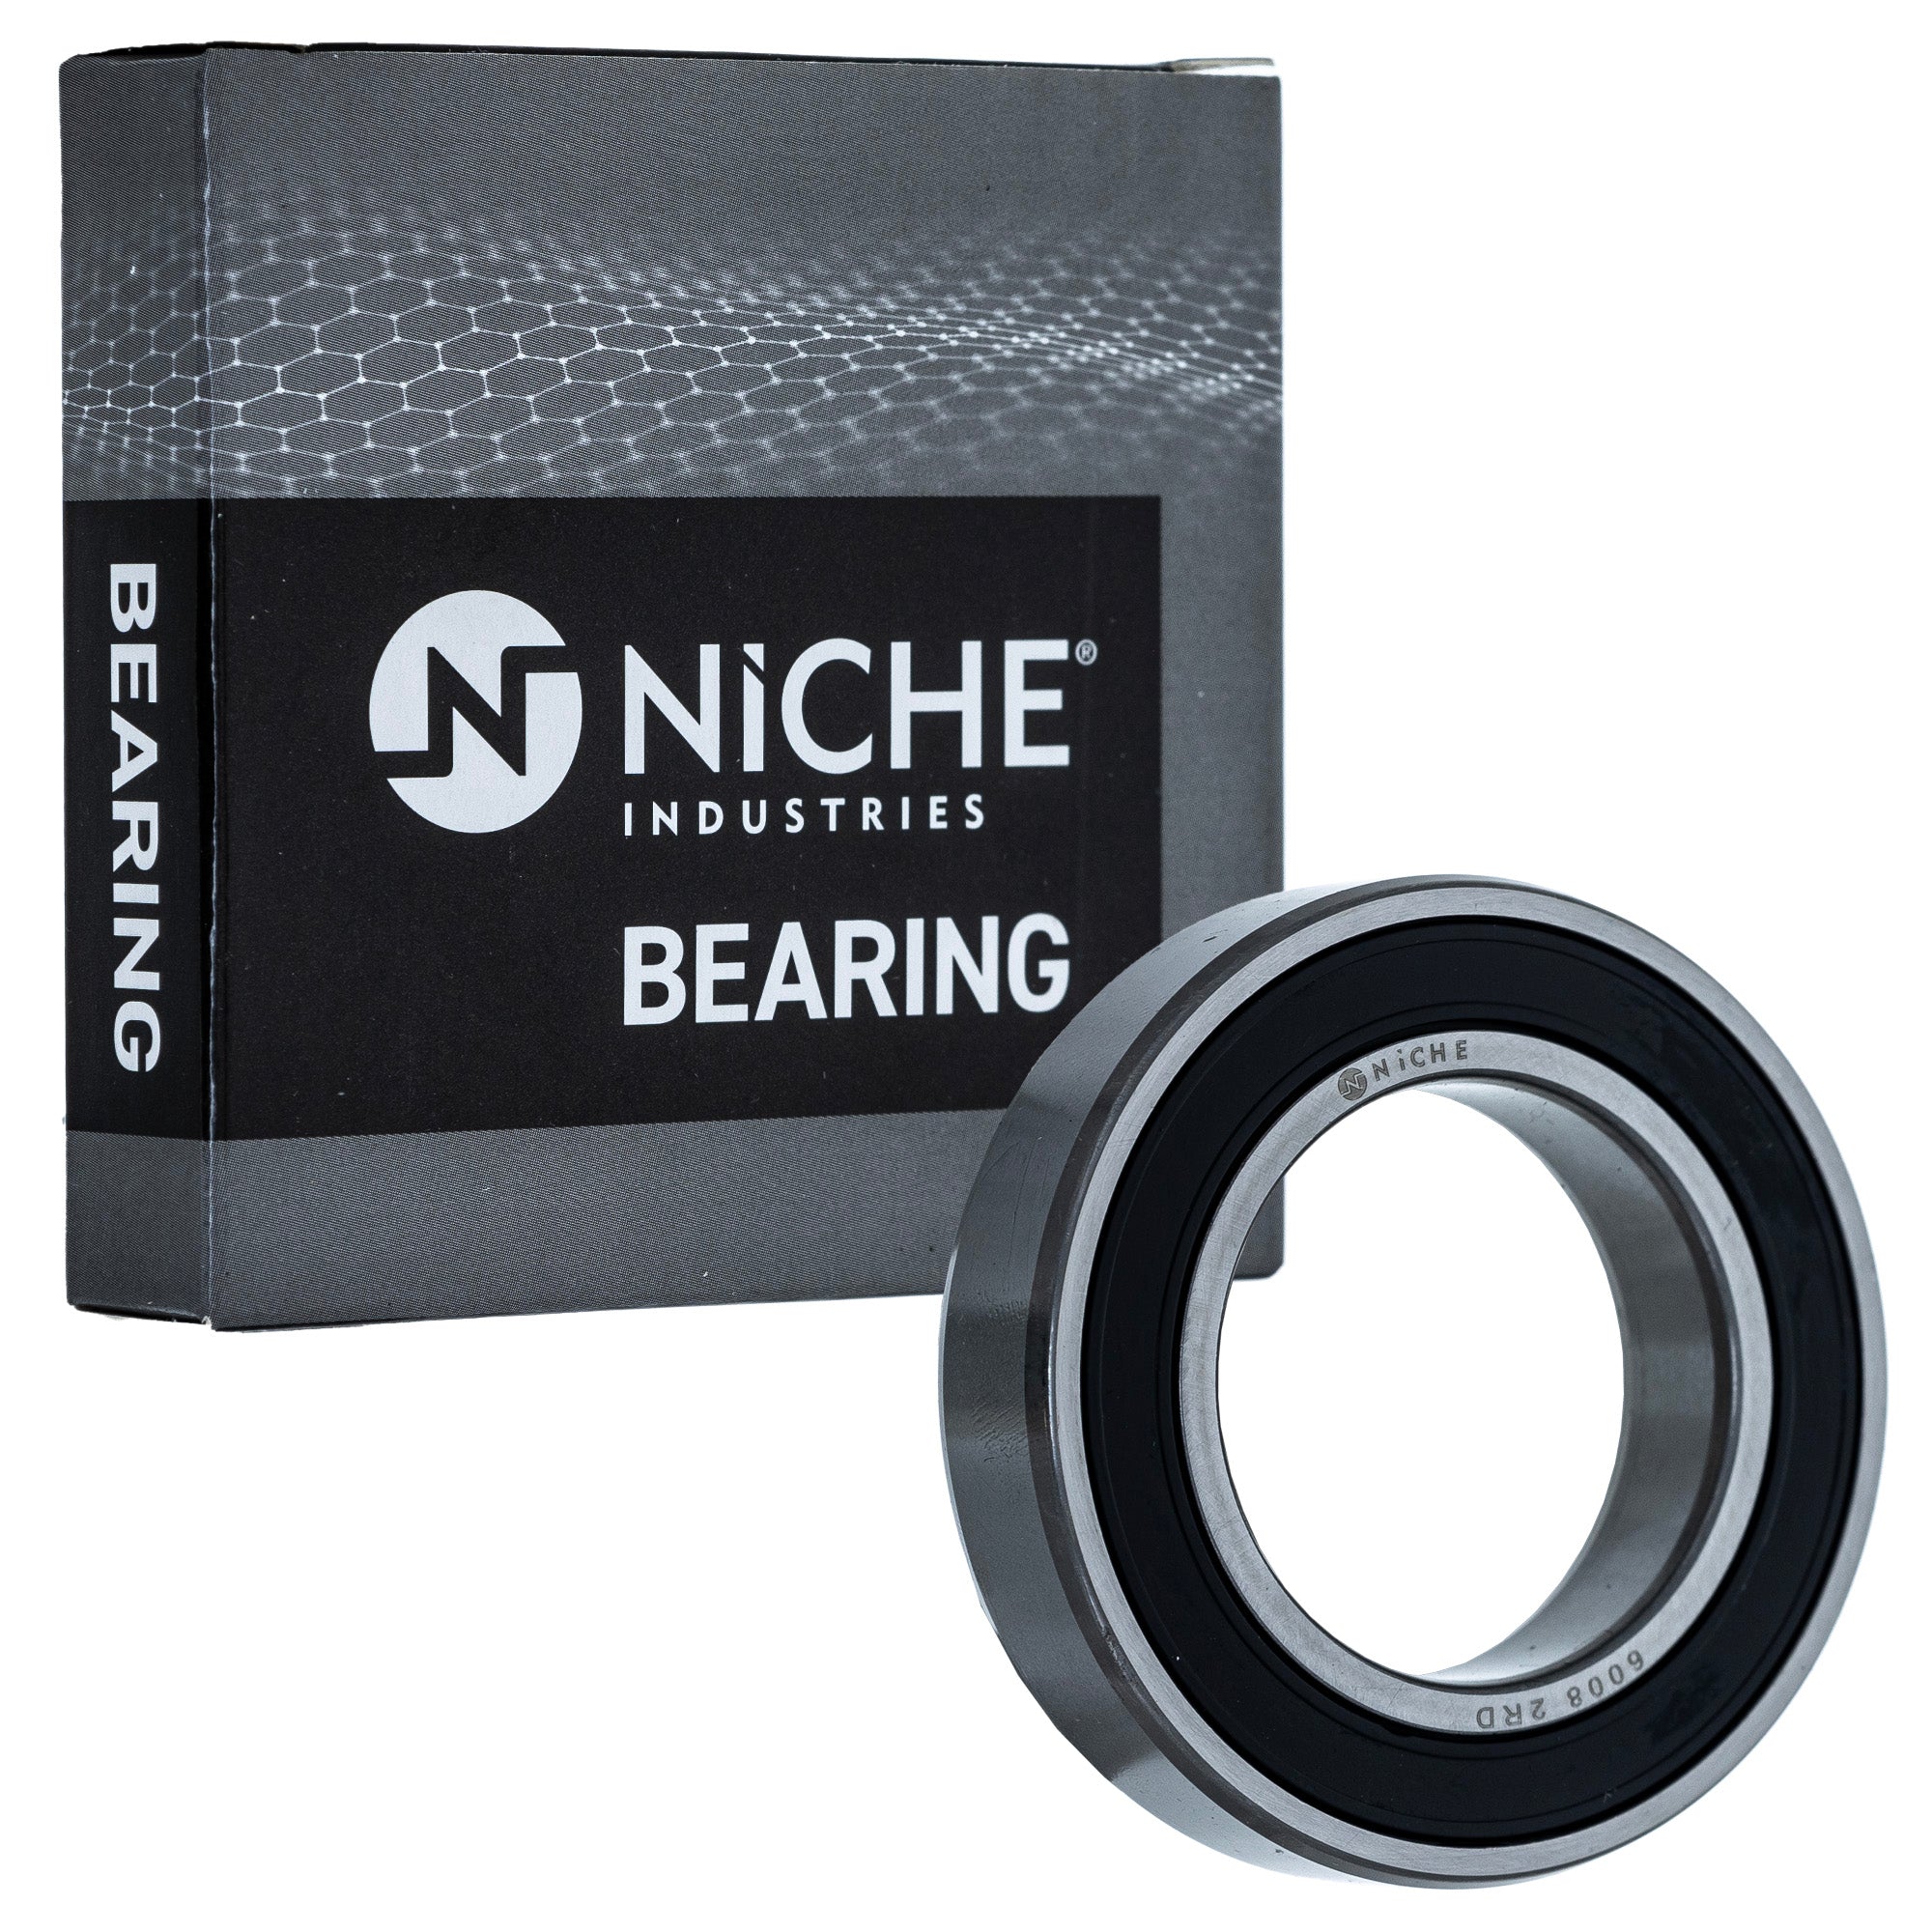 NICHE 519-CBB2209R Bearing 10-Pack for zOTHER Arctic Cat Textron